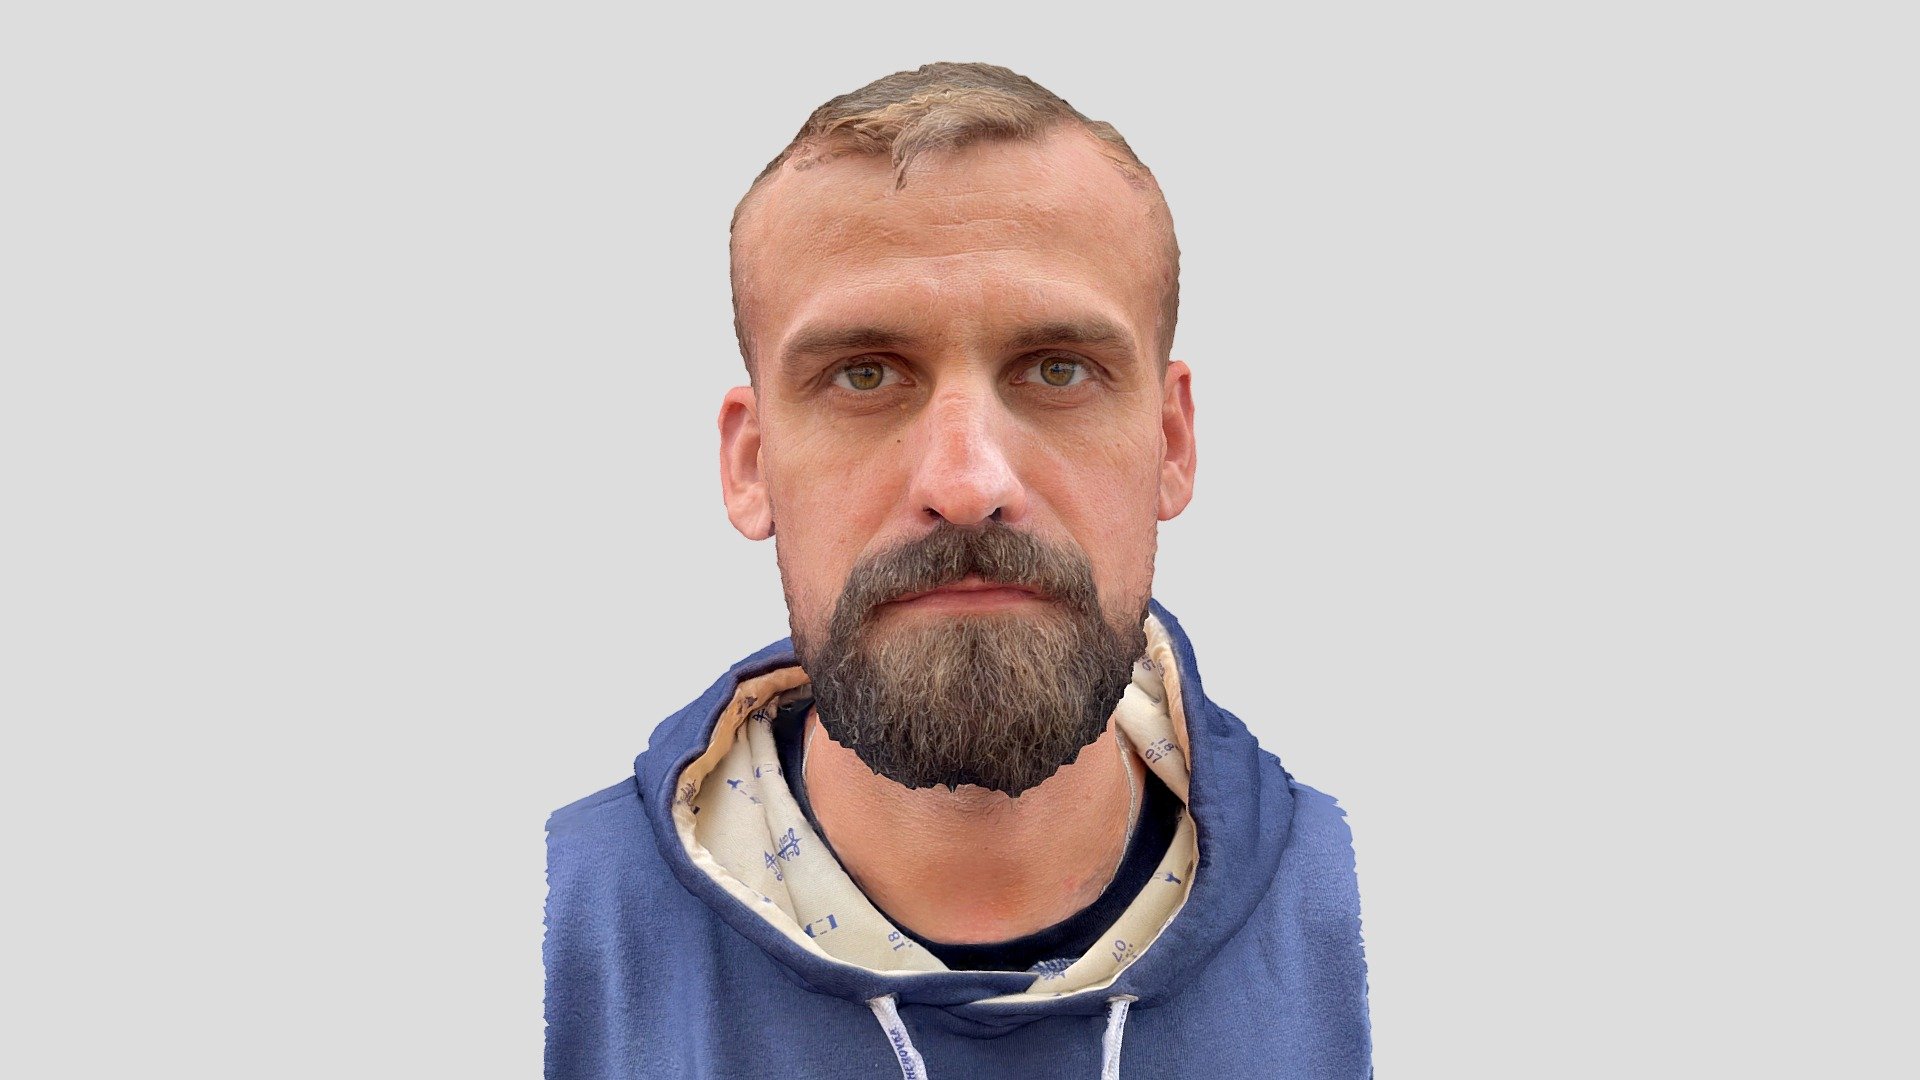 Photorealistic head scan of a young bearded man.

Shot on iPhone 12 Pro Max, processed in Photocatch app on Macbook Air M1.

P.S. you are welcome to contact me if you need the files 3d model